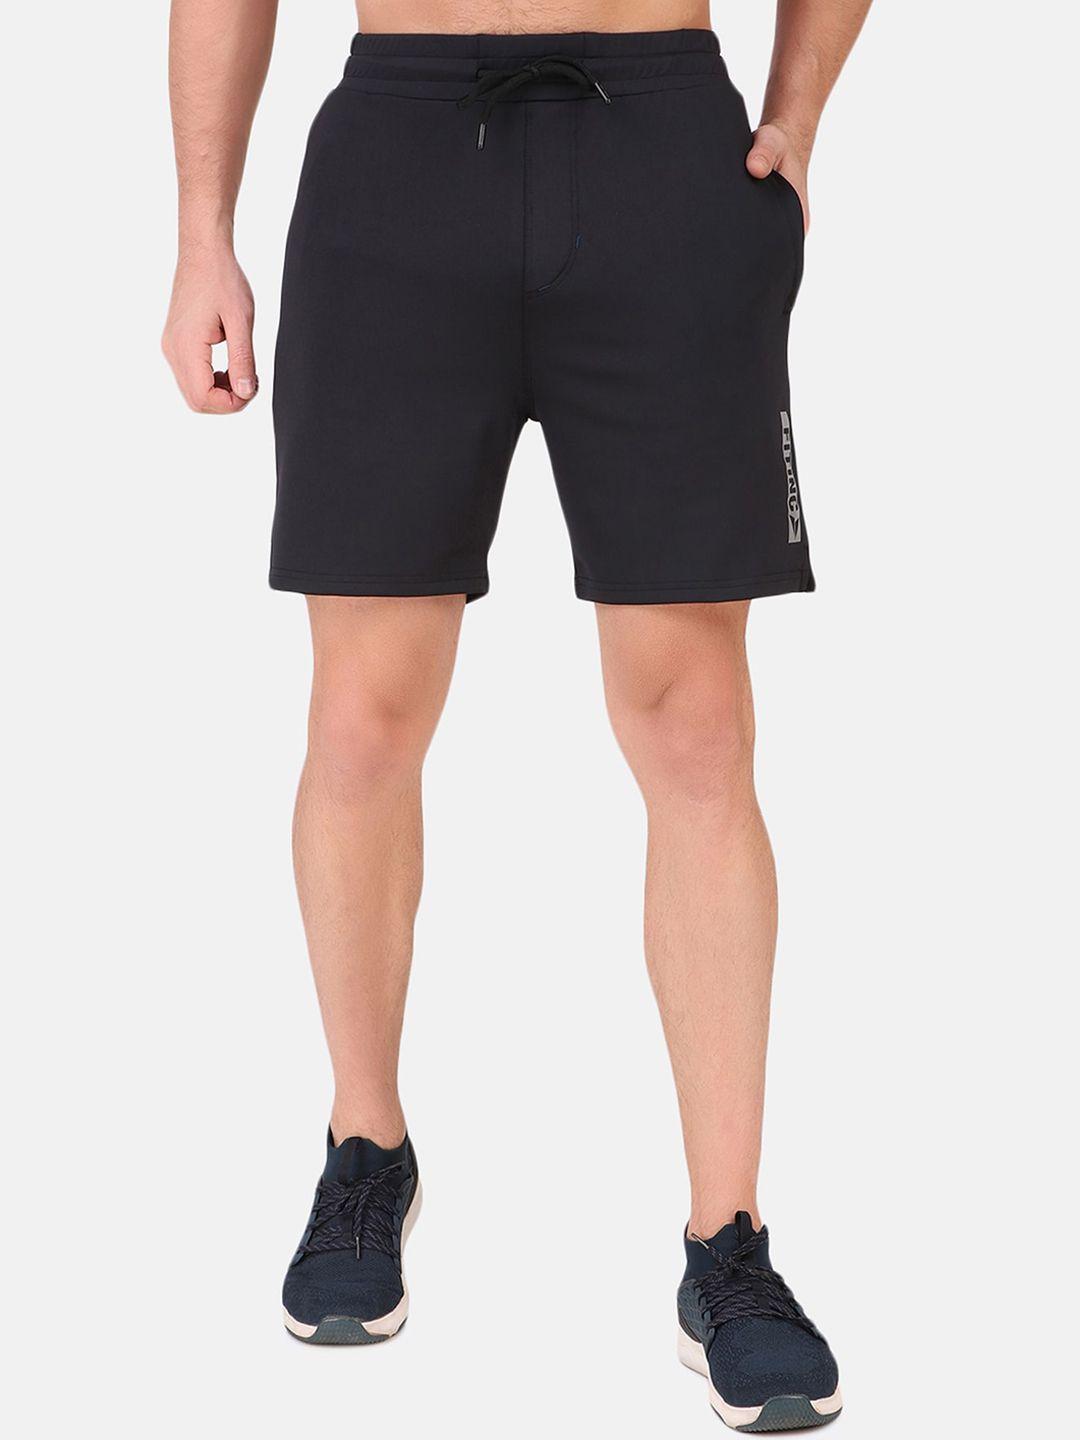 fitinc men black slim fit training or gym sports shorts with antimicrobial technology